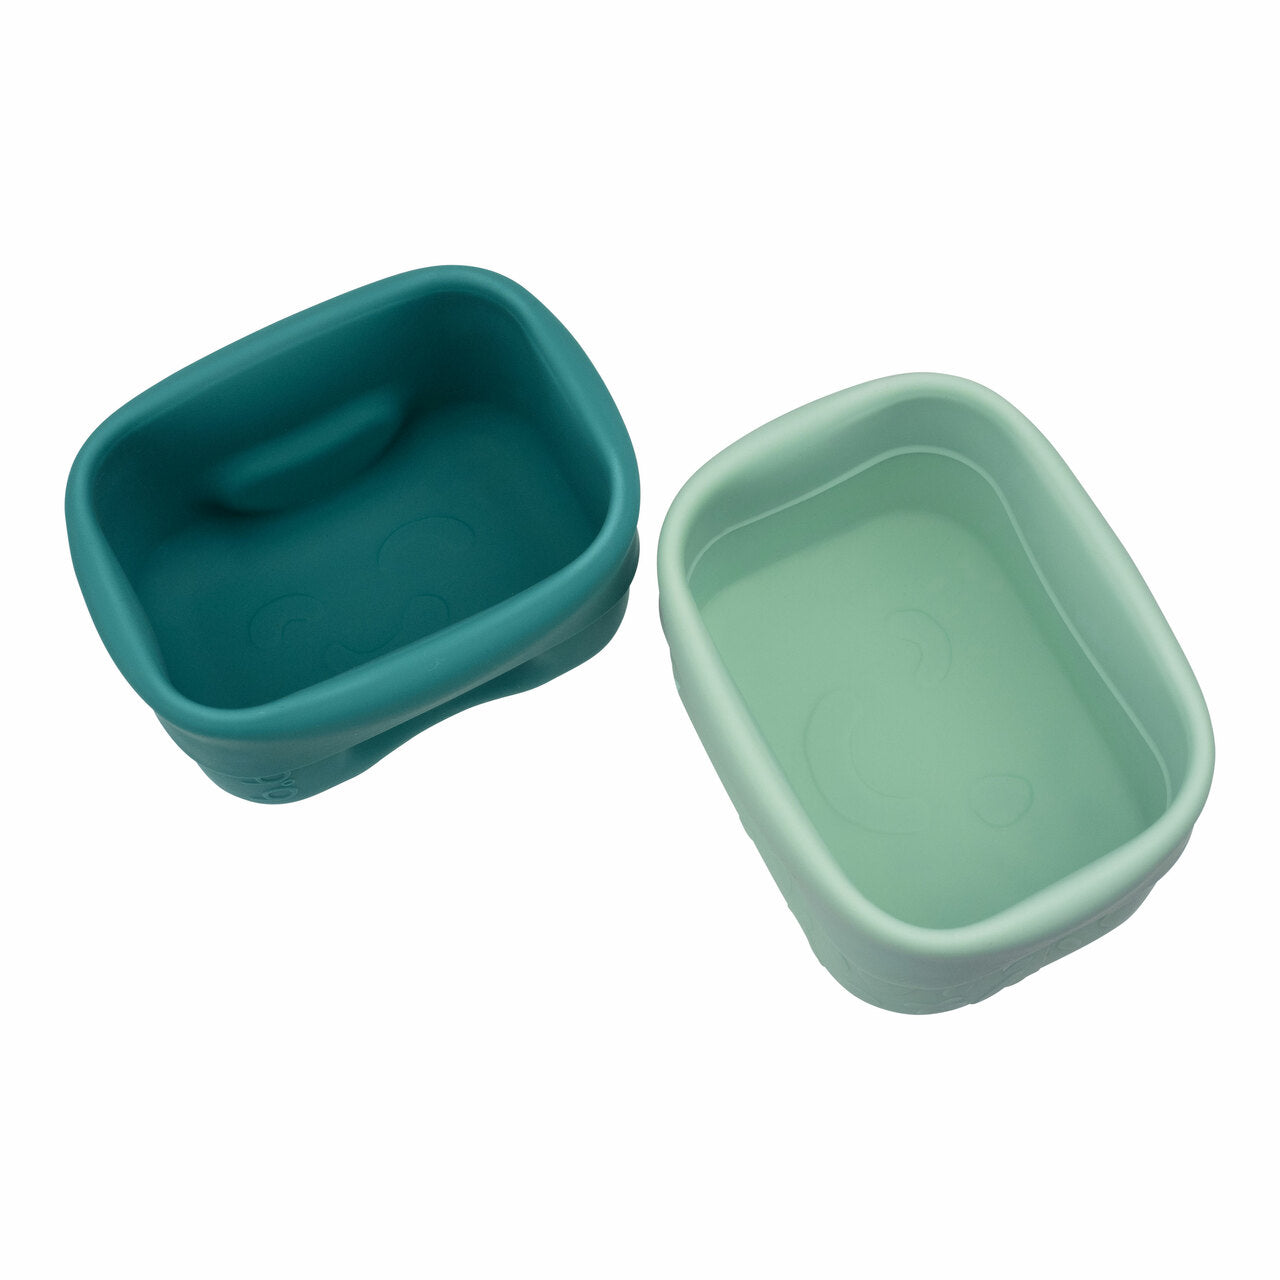 B.box Silicone Snack Cup in Forest available at Bear & Moo